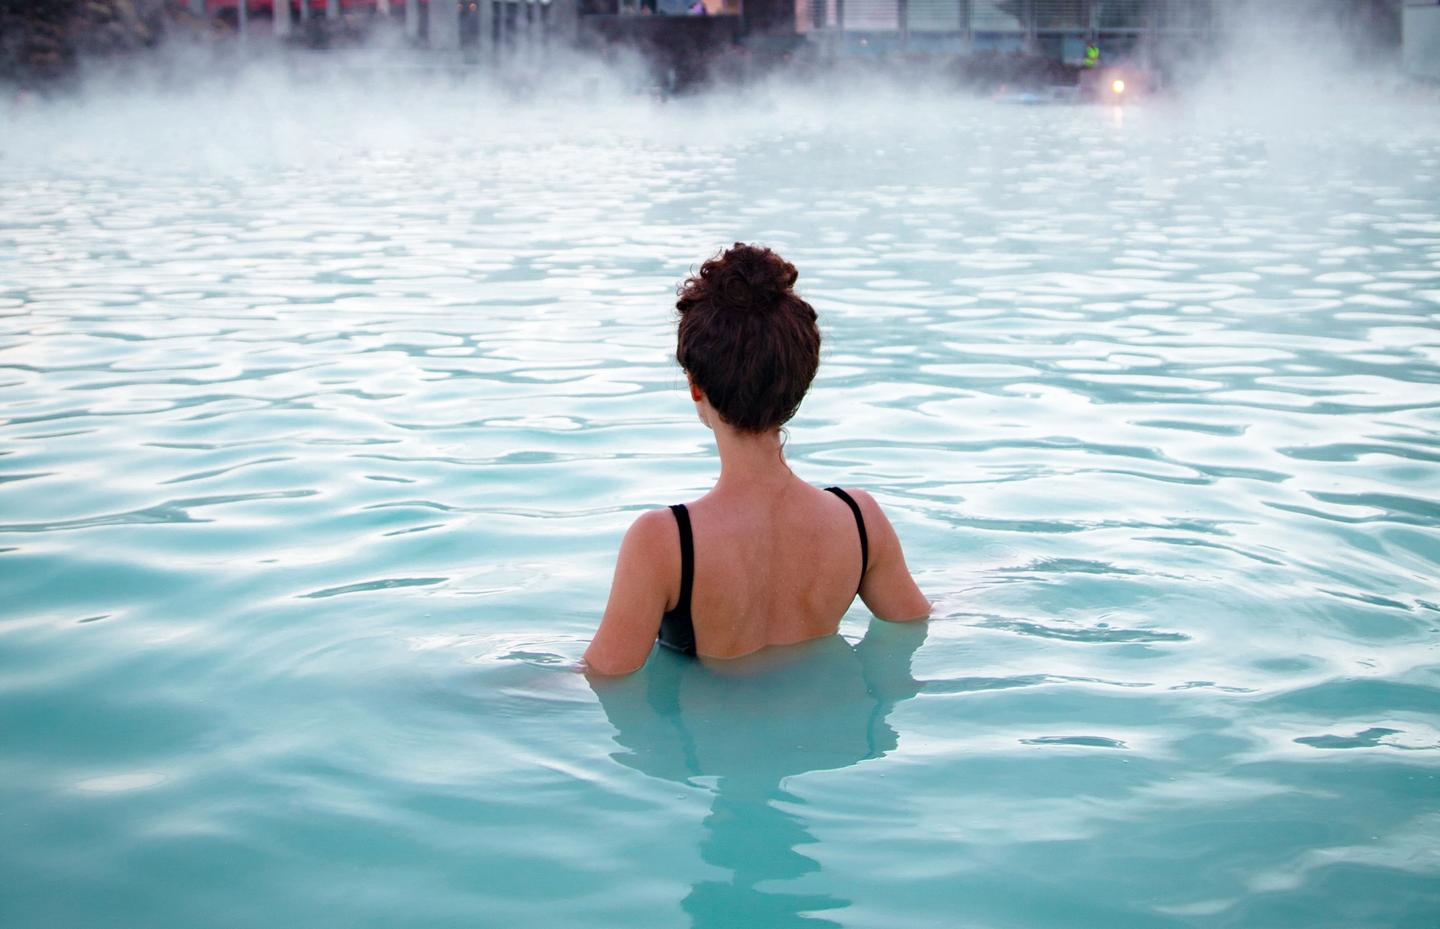 A woman relaxing in a geothermal pool also known as hot springs in iceland that has warm water with perfect temperature